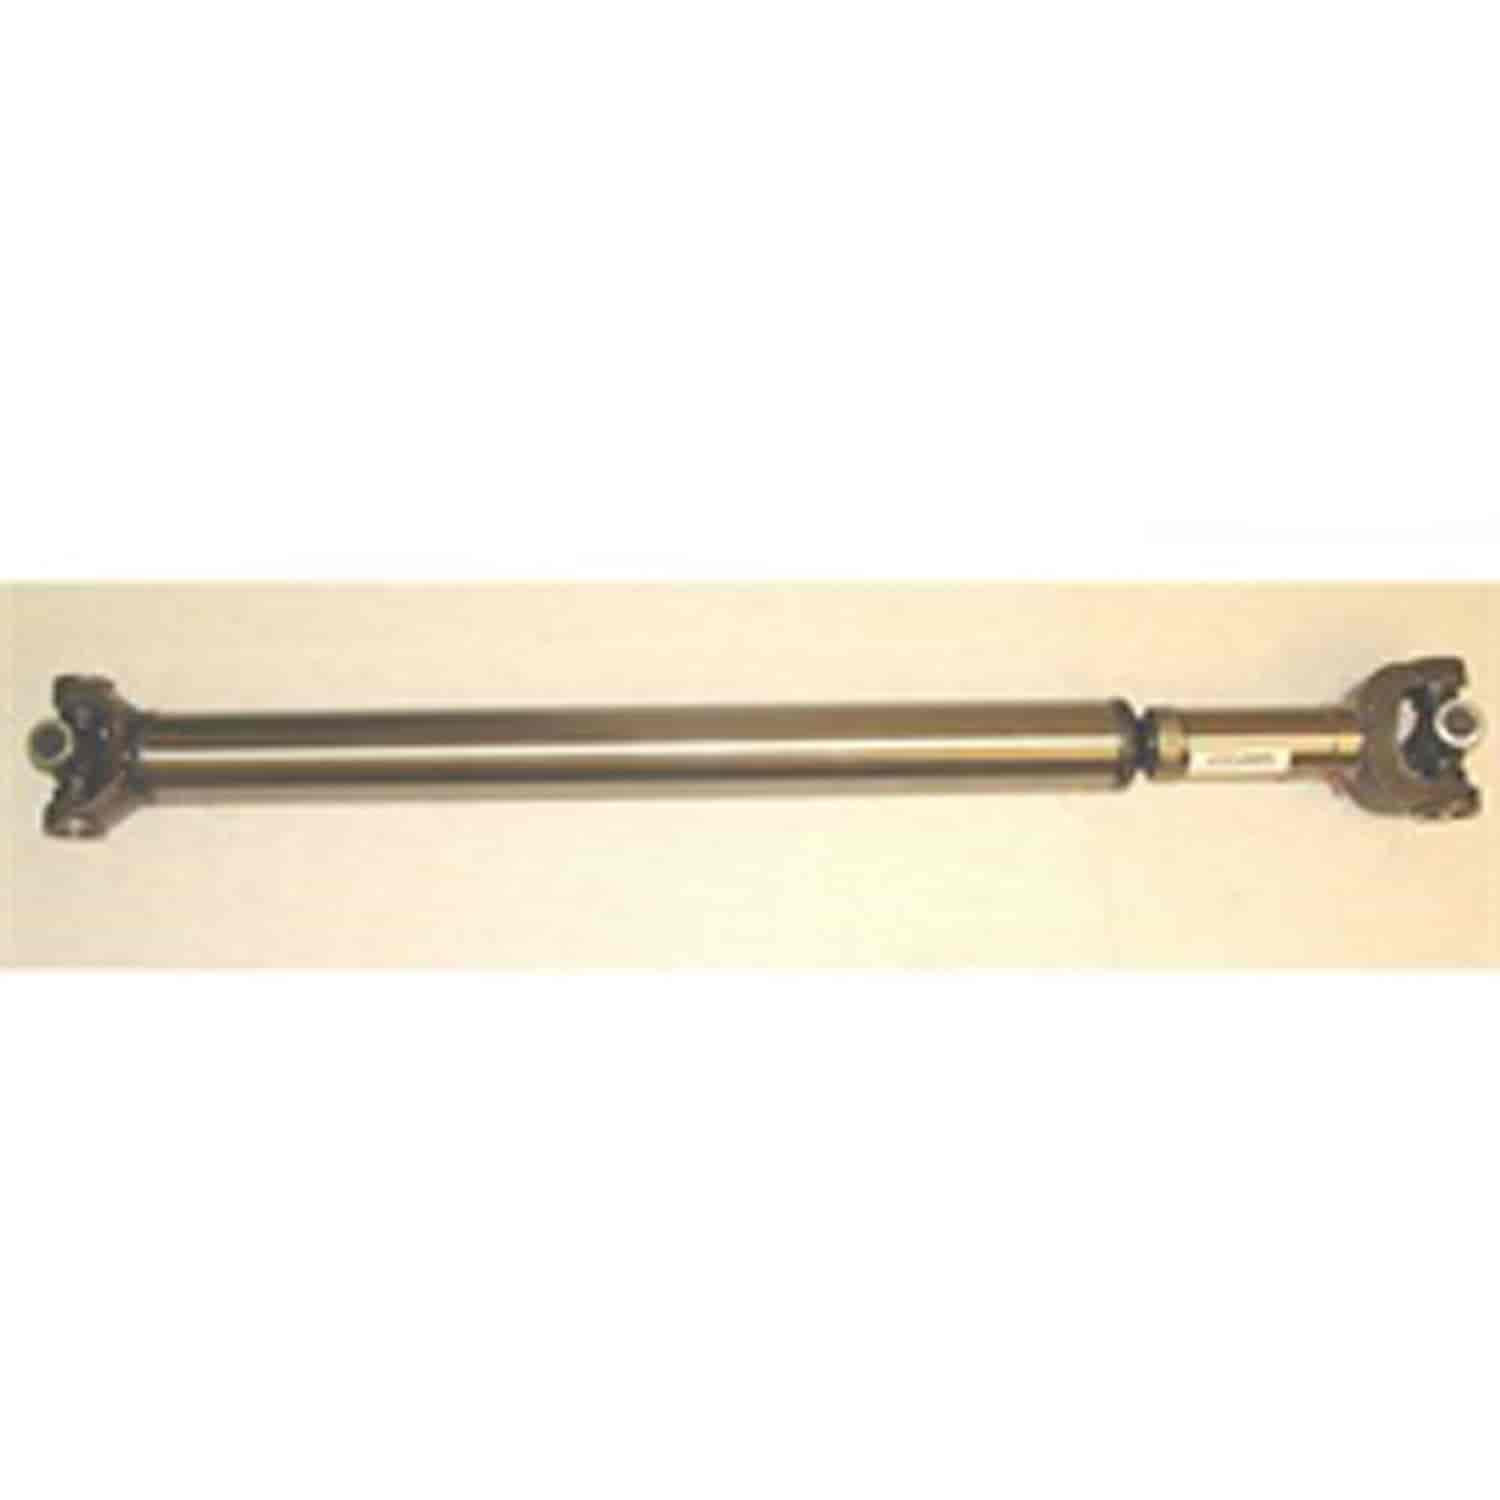 Stock replacement rear driveshaft from Omix-ADA, Fits 81-86 Jeep CJ8 with a 4 or 6-cylinder engi